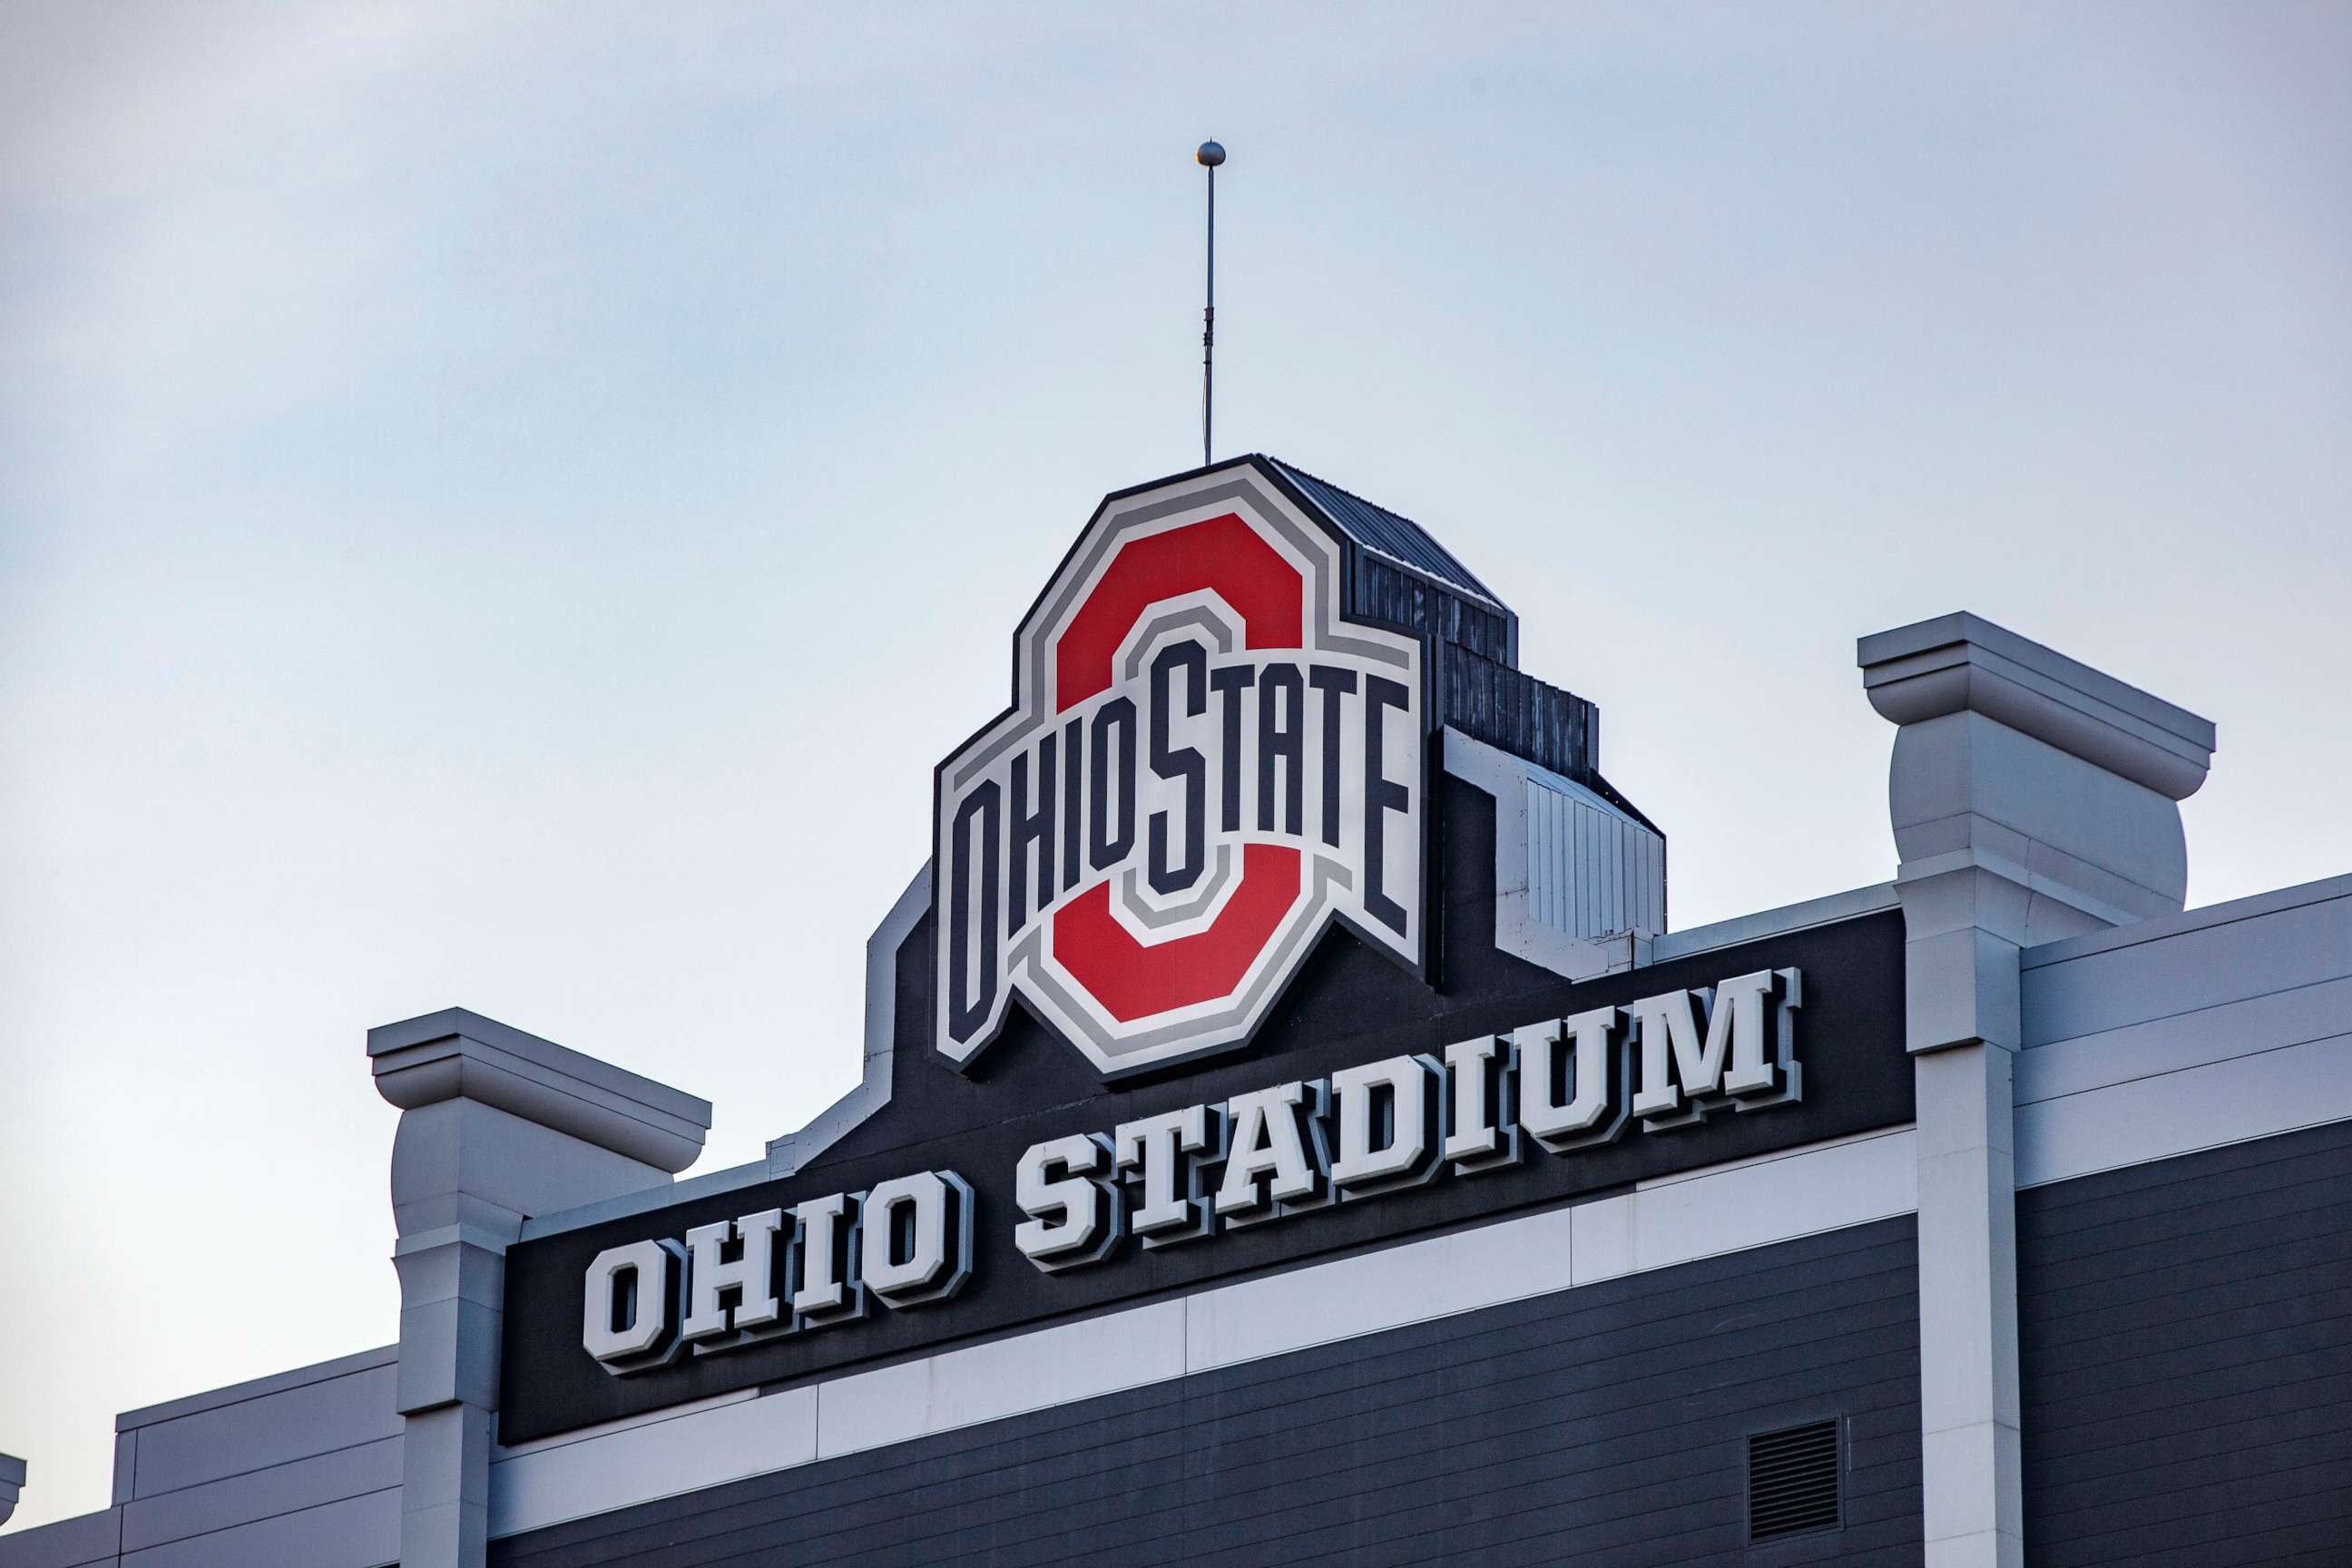 Ohio State (OSU) Trademarks 'THE' for Buckeyes Apparel After Fight -  Bloomberg